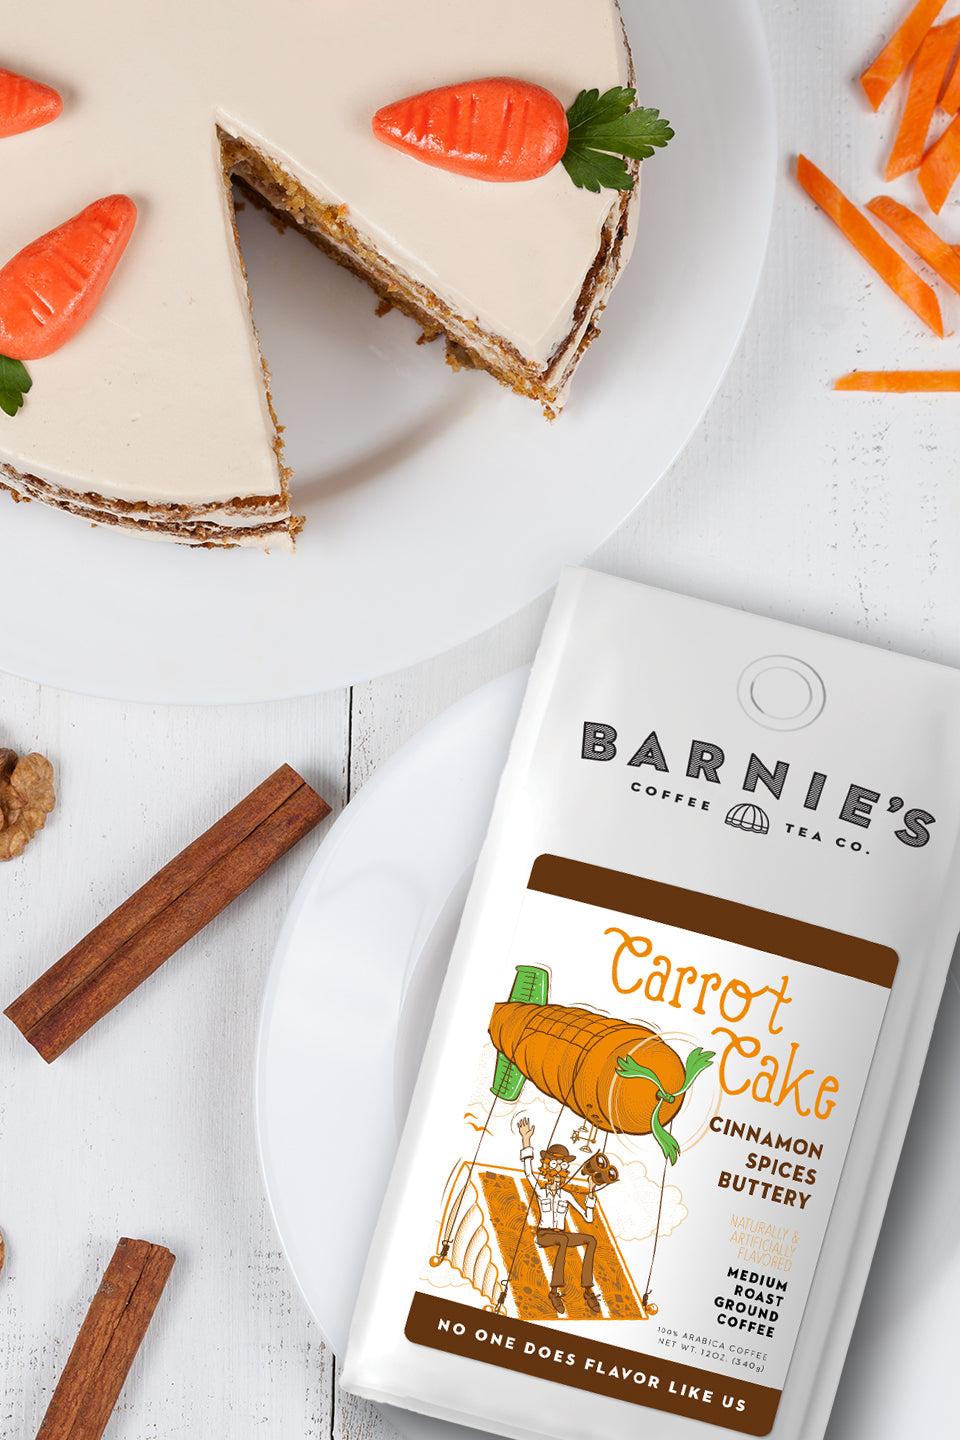 Behind The Bean: The Inspiration Behind Barnie's Carrot Cake Flavor